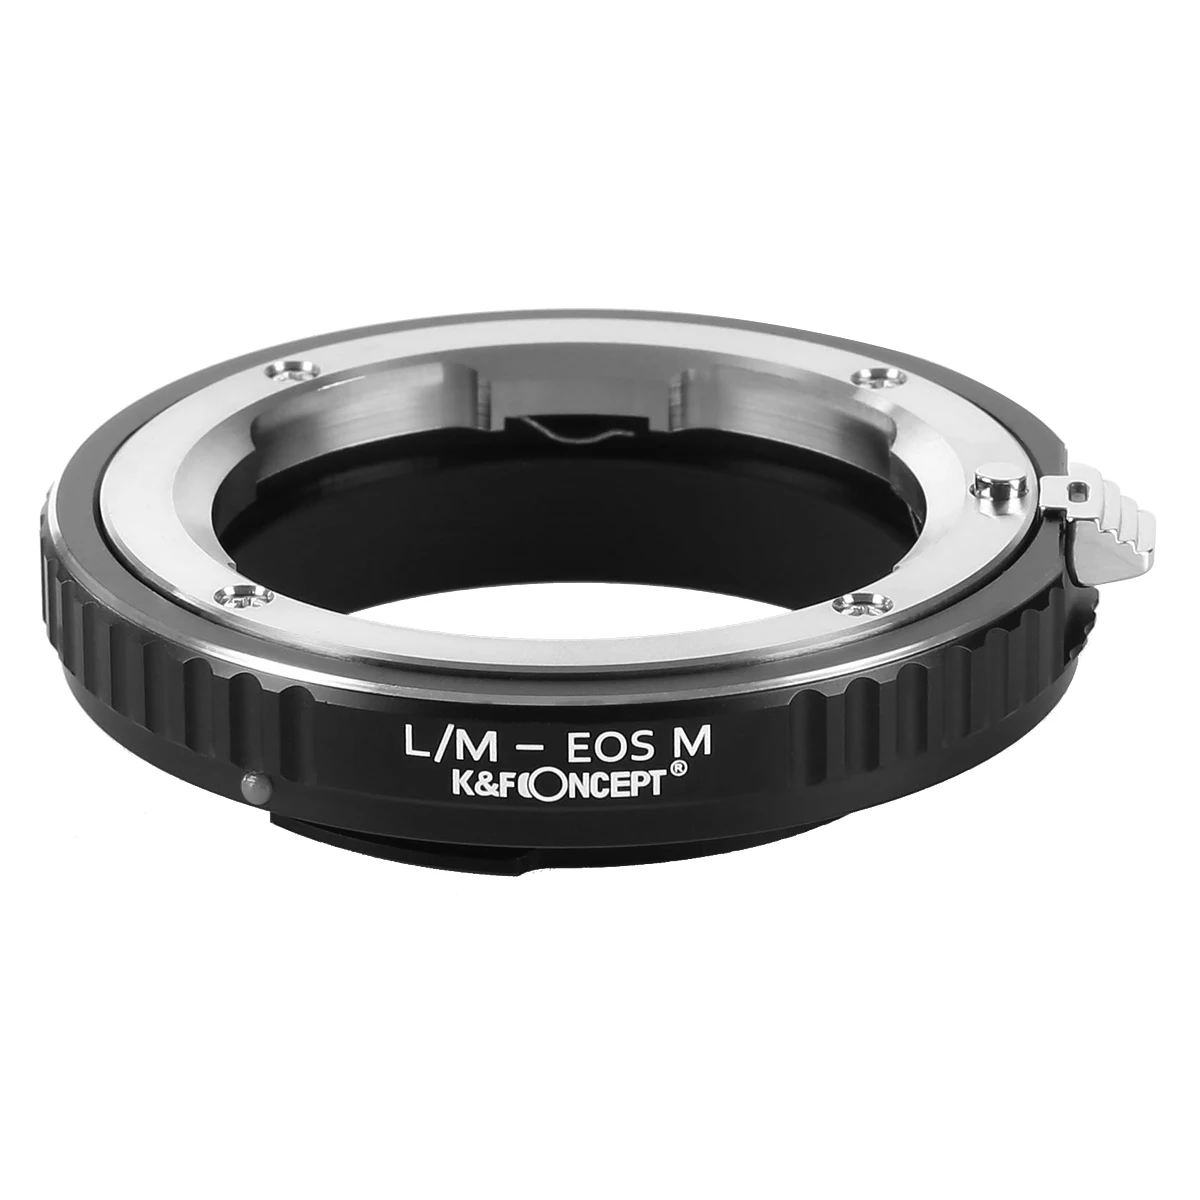 

K&F Concept Lens Adapter for Leica M mount lens to Canon EOS M camera M1 M2 M3 M5 M6 M50 M100